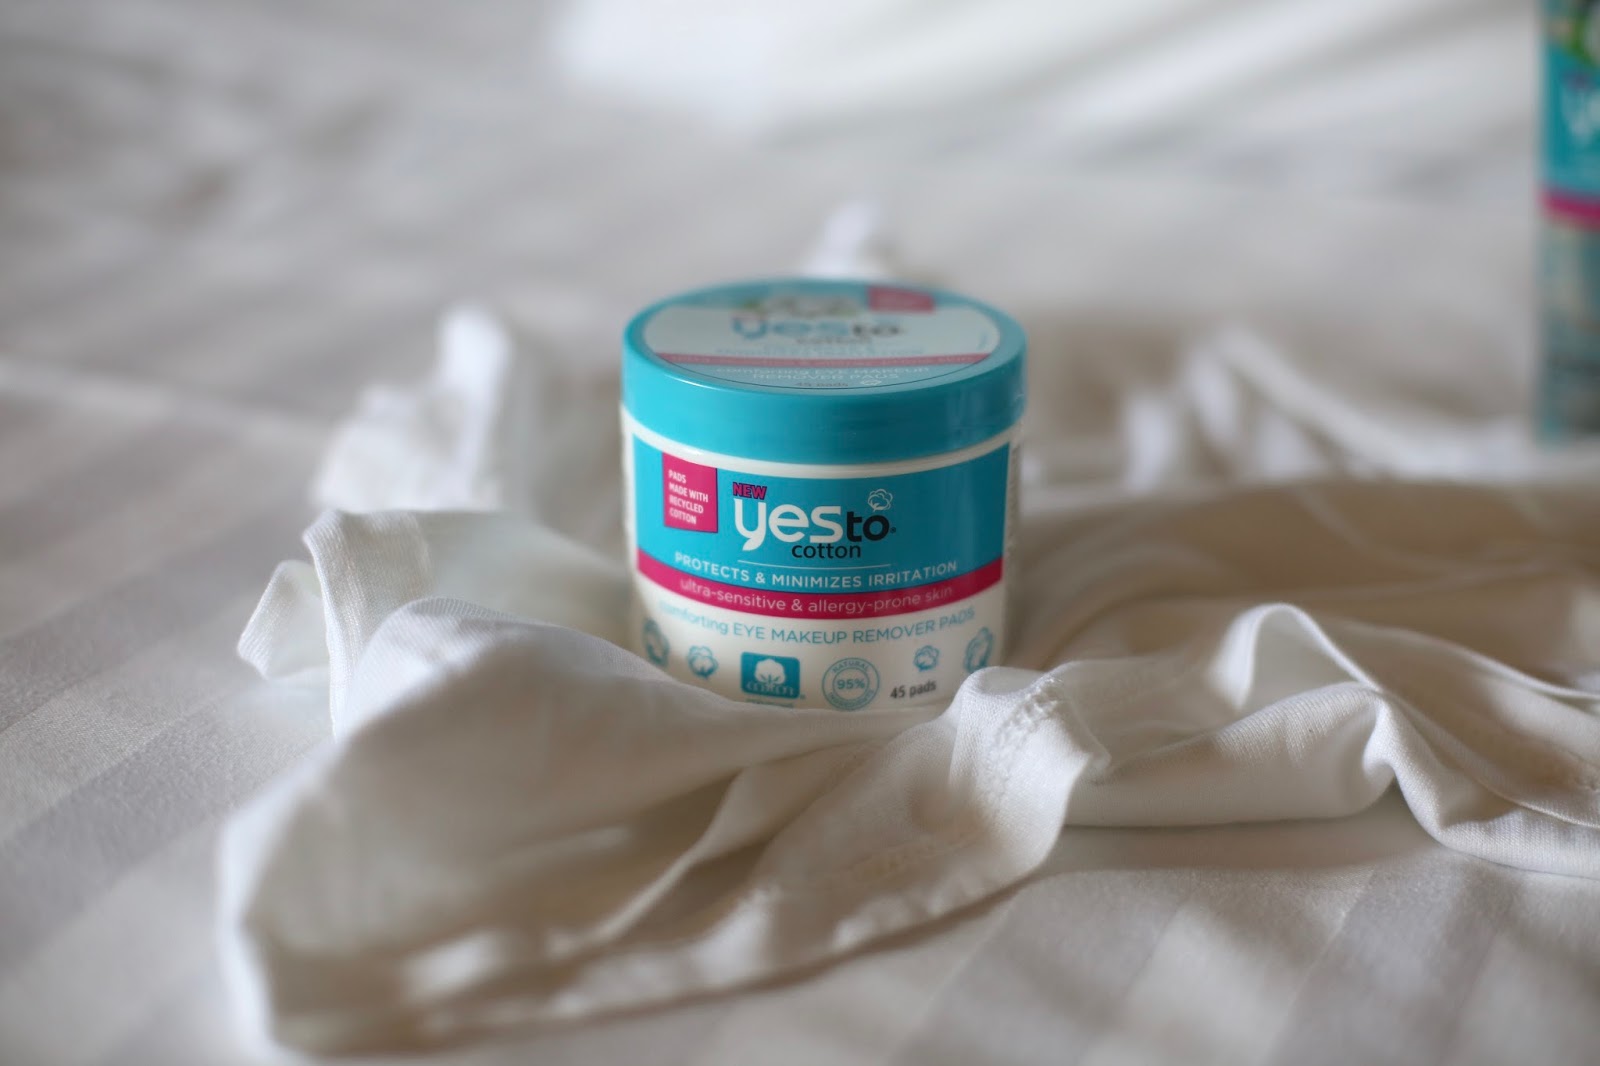 yes to cotton face wipes